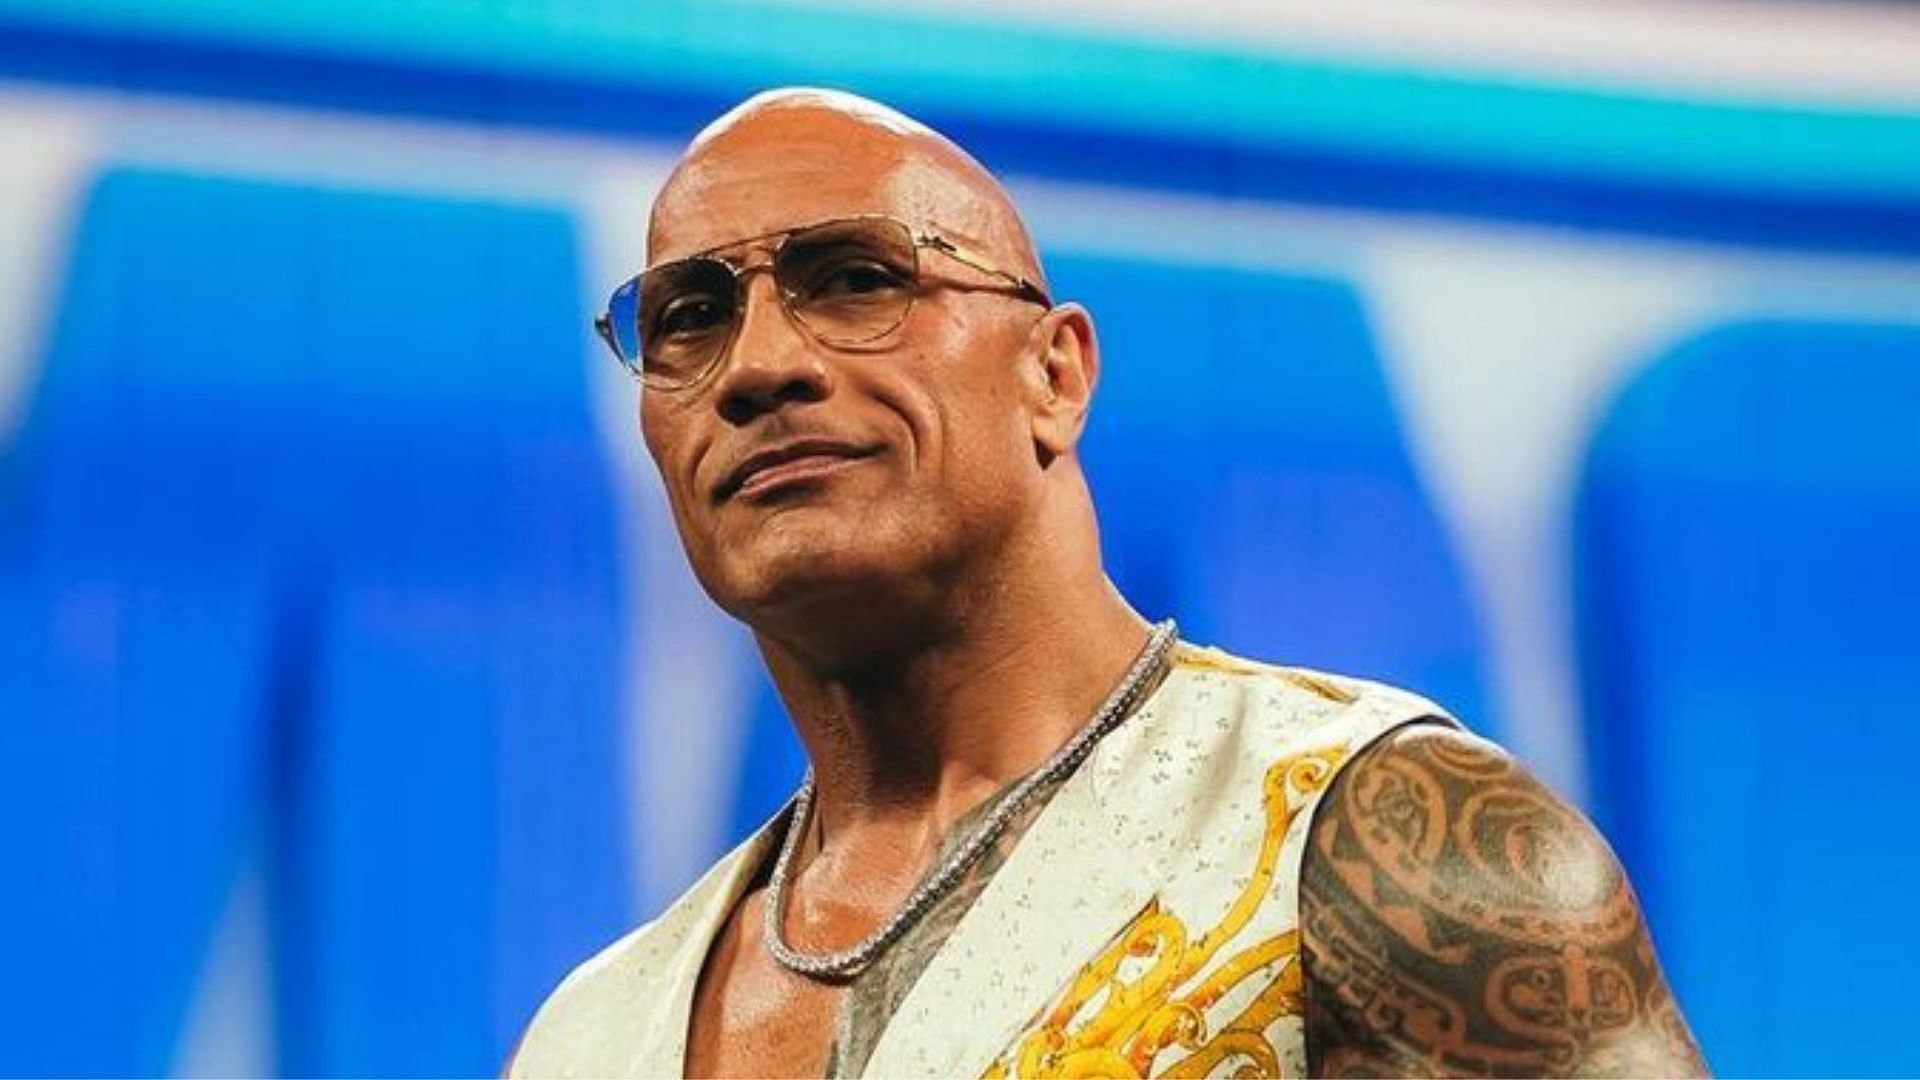 The Rock is set to appear on SmackDown (Credit: WWE)